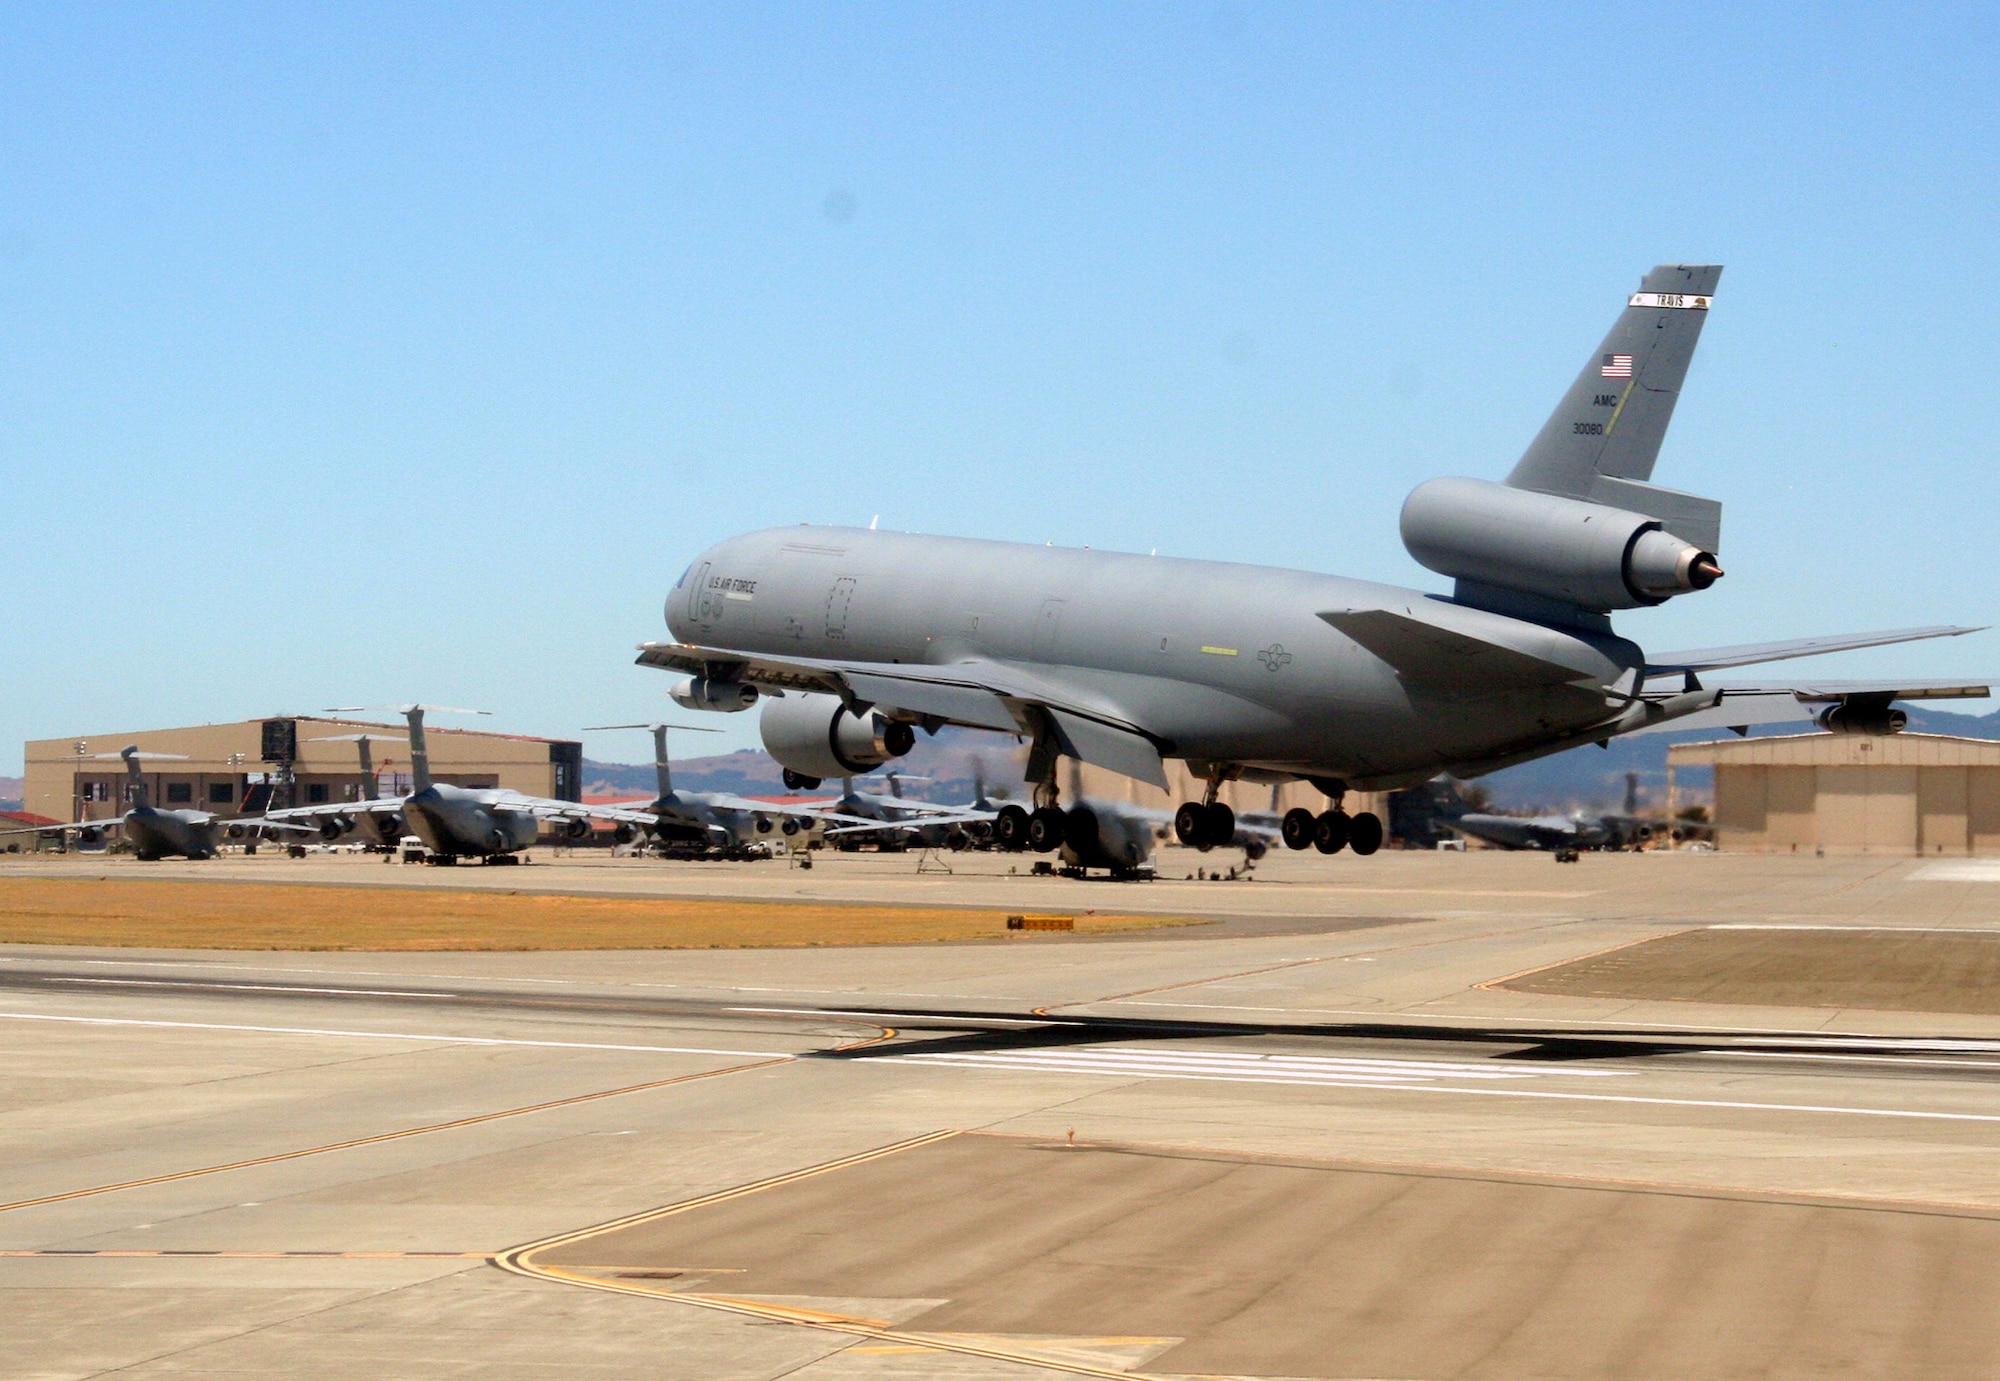 A KC-10 Extender comes in for a landing on the flightline at Travis Air Force Base, Calif., on Aug. 4, 2009.  The KC-10 is one of Air Force's and Air Mobility Command's air refueling aircraft that helps provide global reach and the Air Force to fly, fight and win...in air, space and cyberspace.  (U.S. Air Force Photo/Tech. Sgt. Scott T. Sturkol)